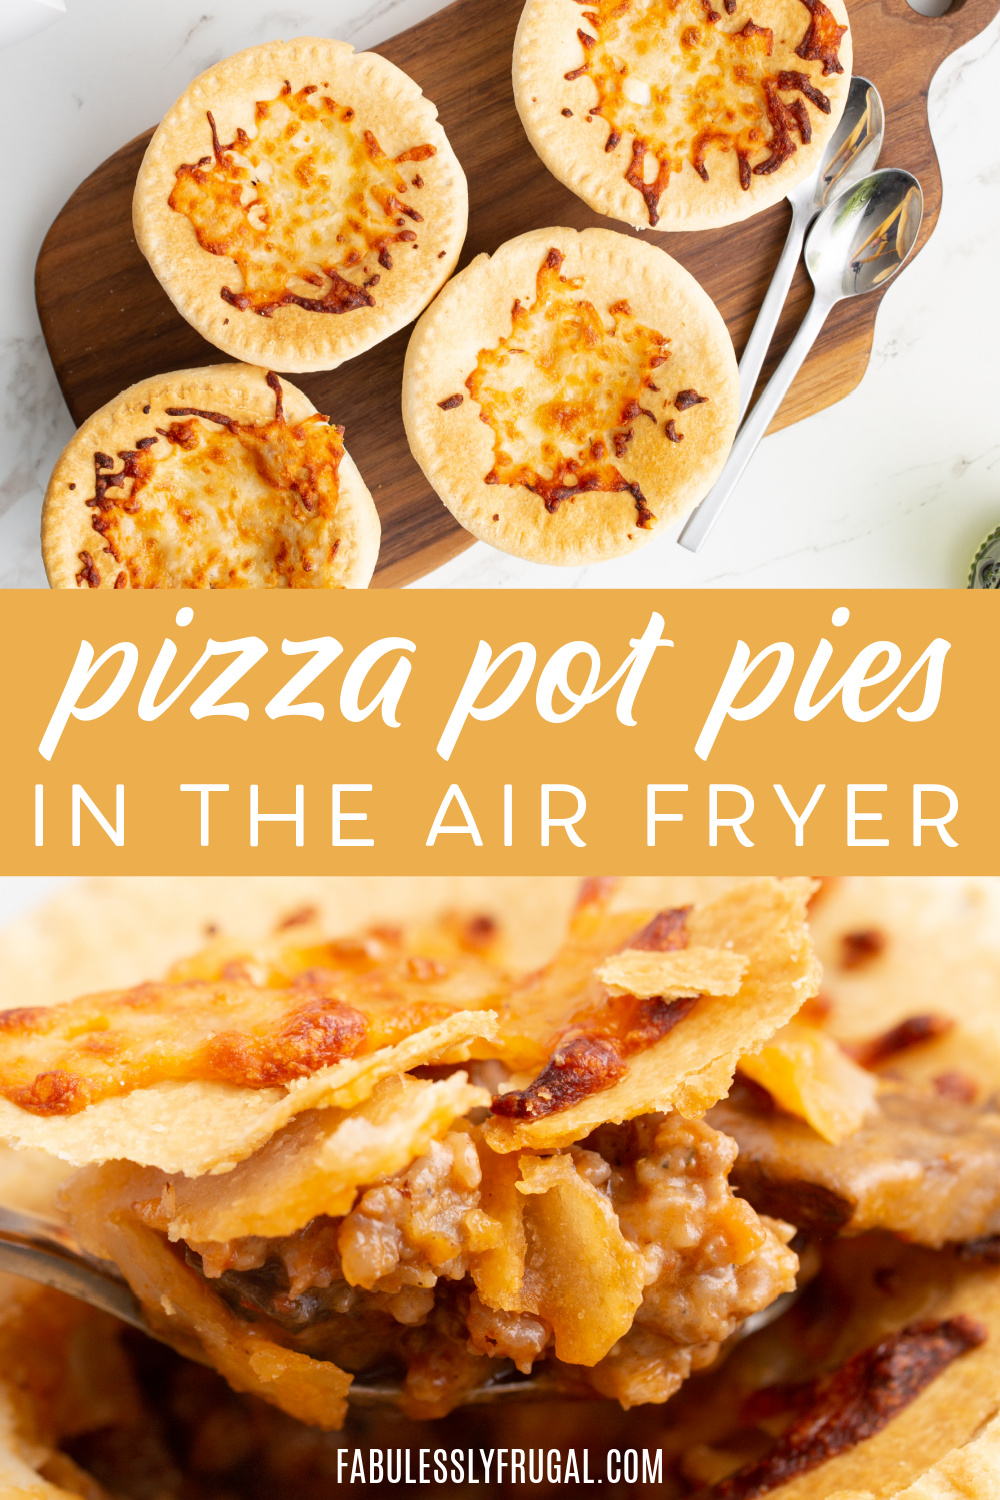 https://fabulesslyfrugal.com/wp-content/uploads/2023/06/how-to-make-pizza-pot-pies-in-the-air-fryer-2.jpg